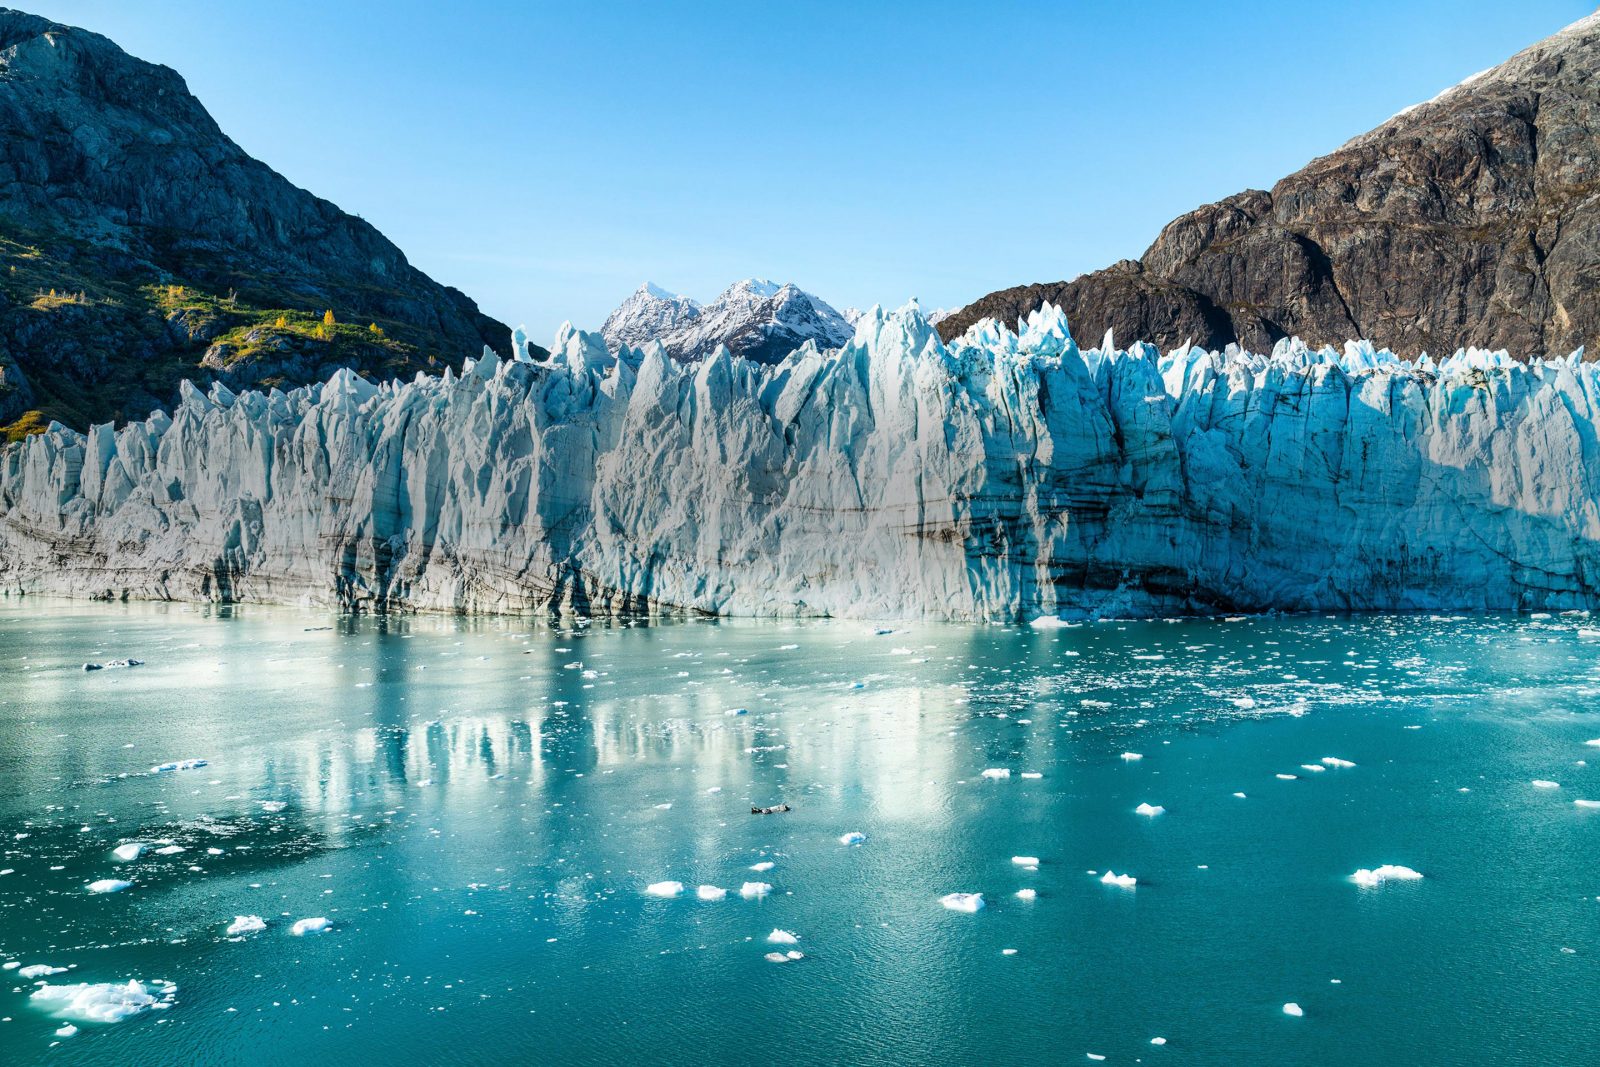 Can You Score Better Than 80% On This U.S. Presidents Quiz? Glacier Bay National Park, Alaska